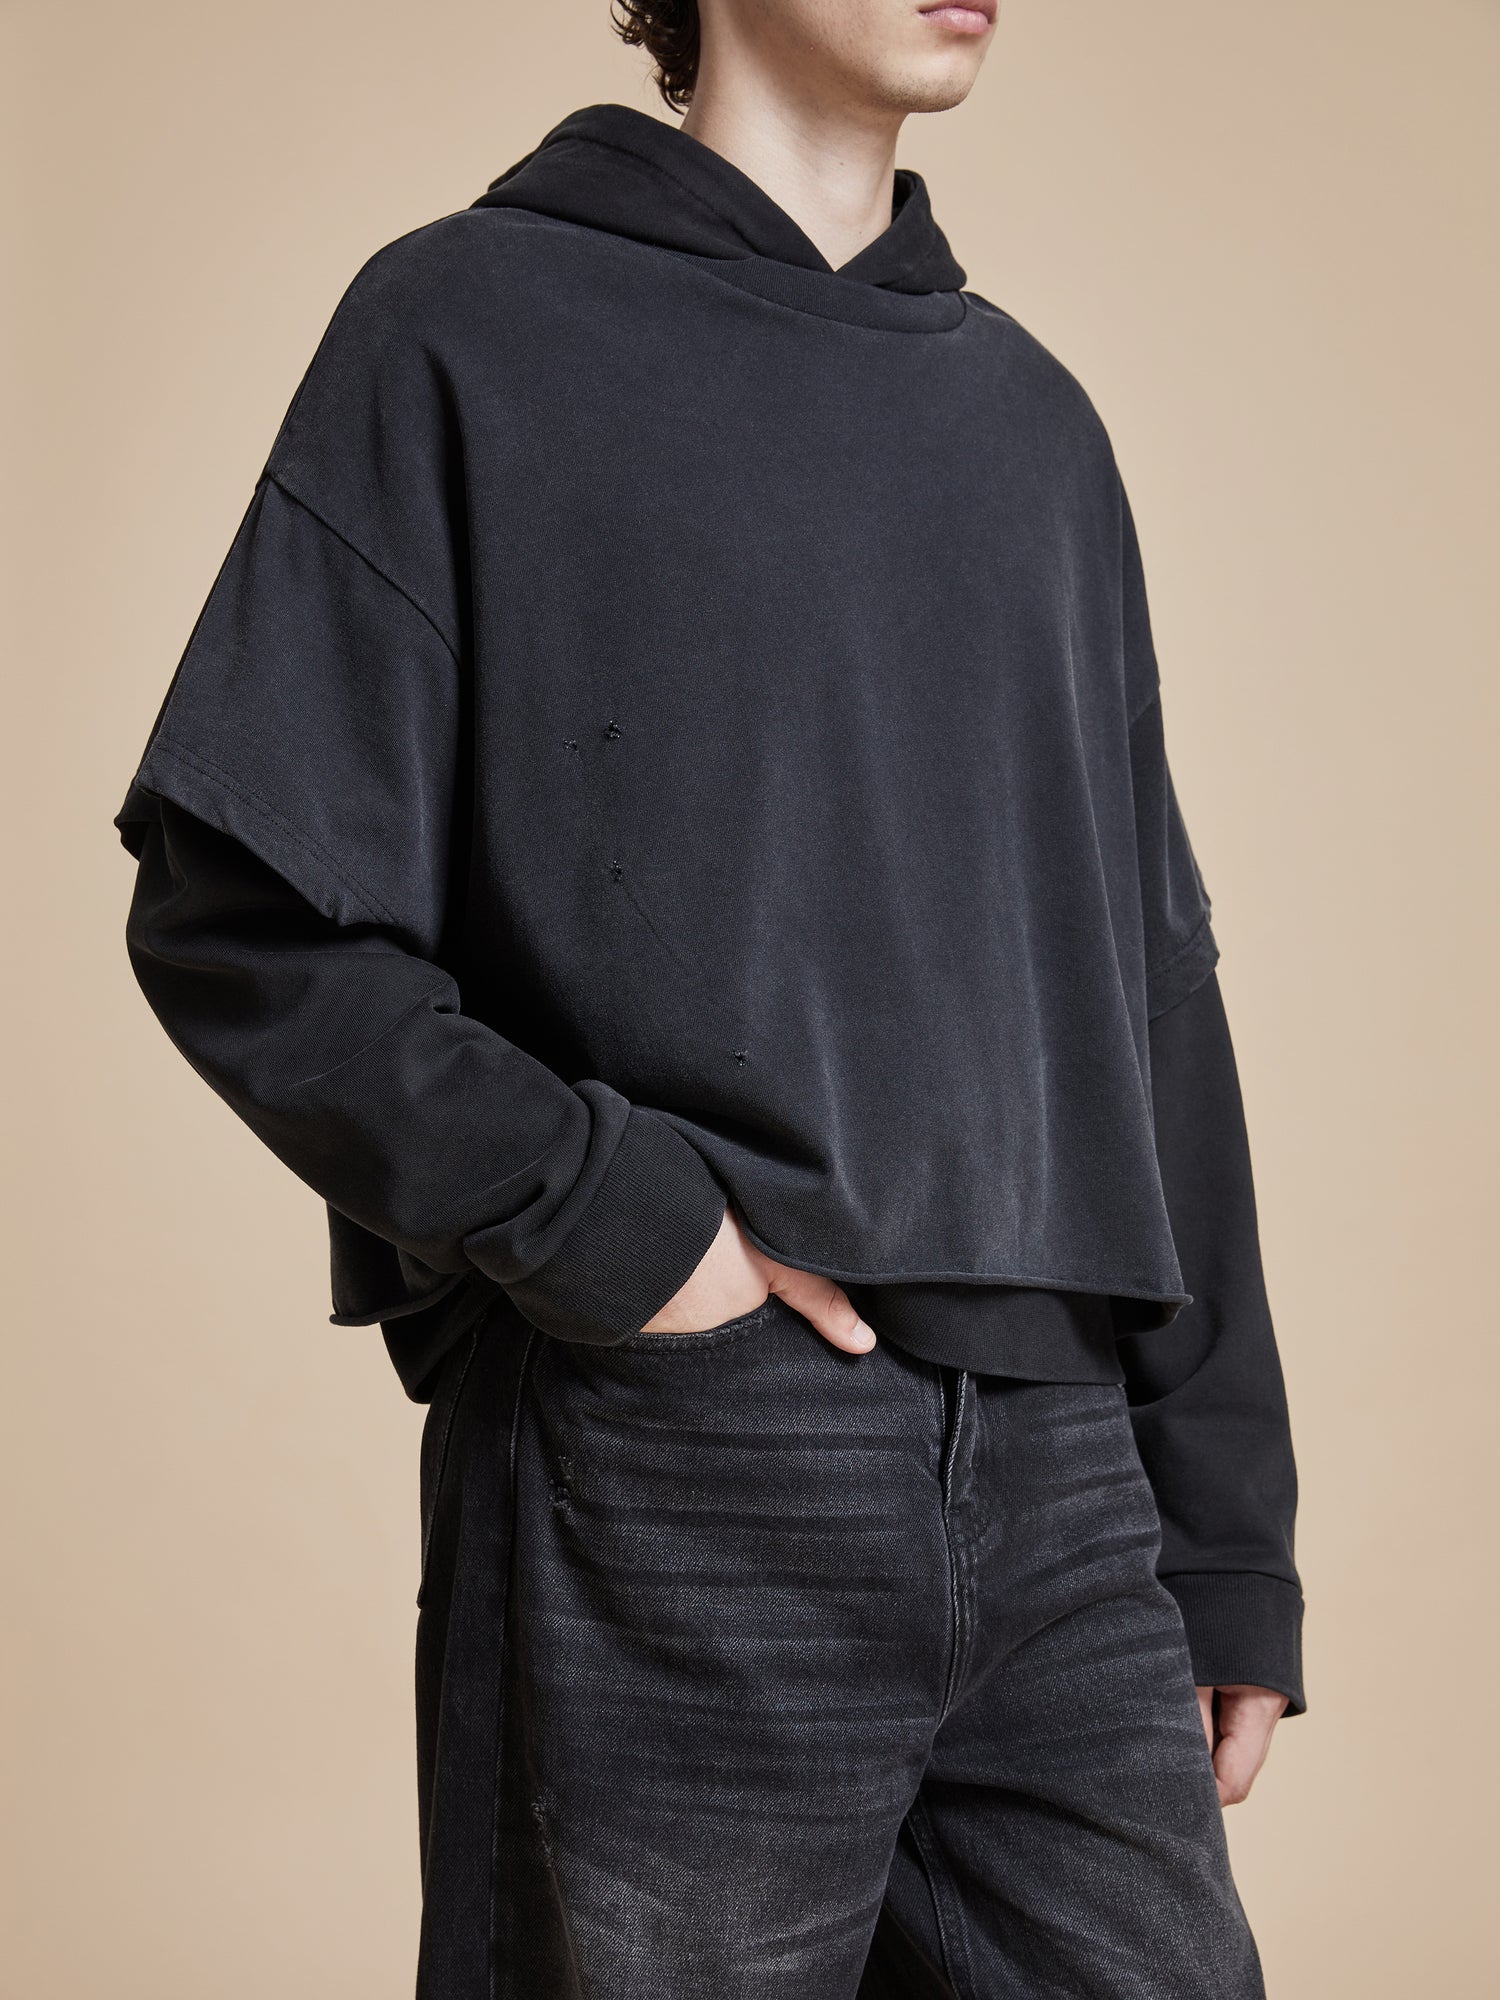 A man wearing a Found Double Layer Hoodie and jeans.